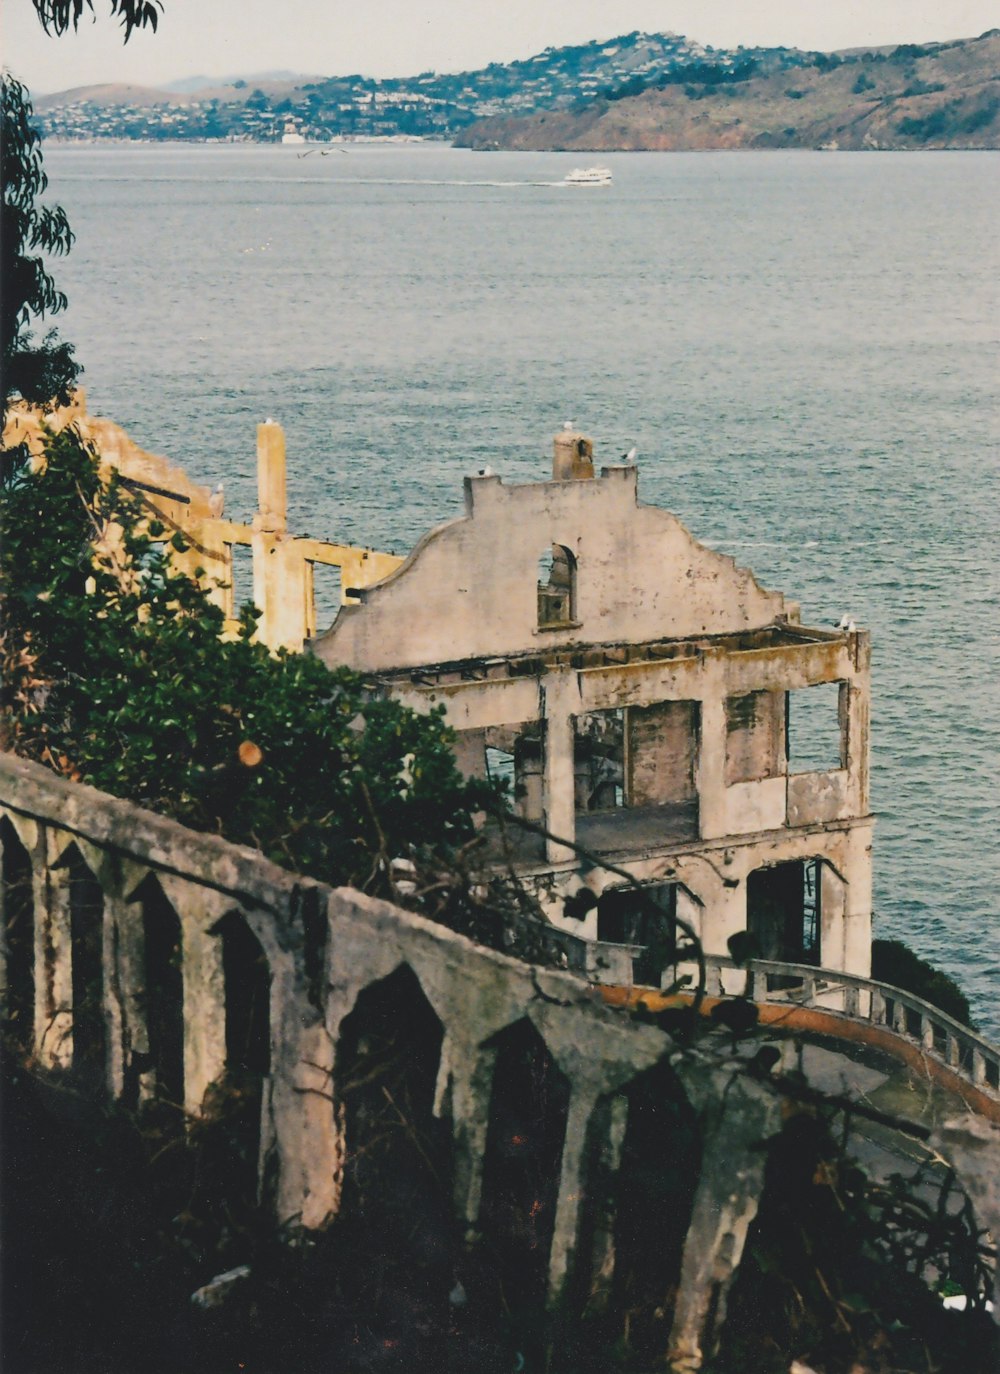 an old house sitting on top of a cliff next to a body of water